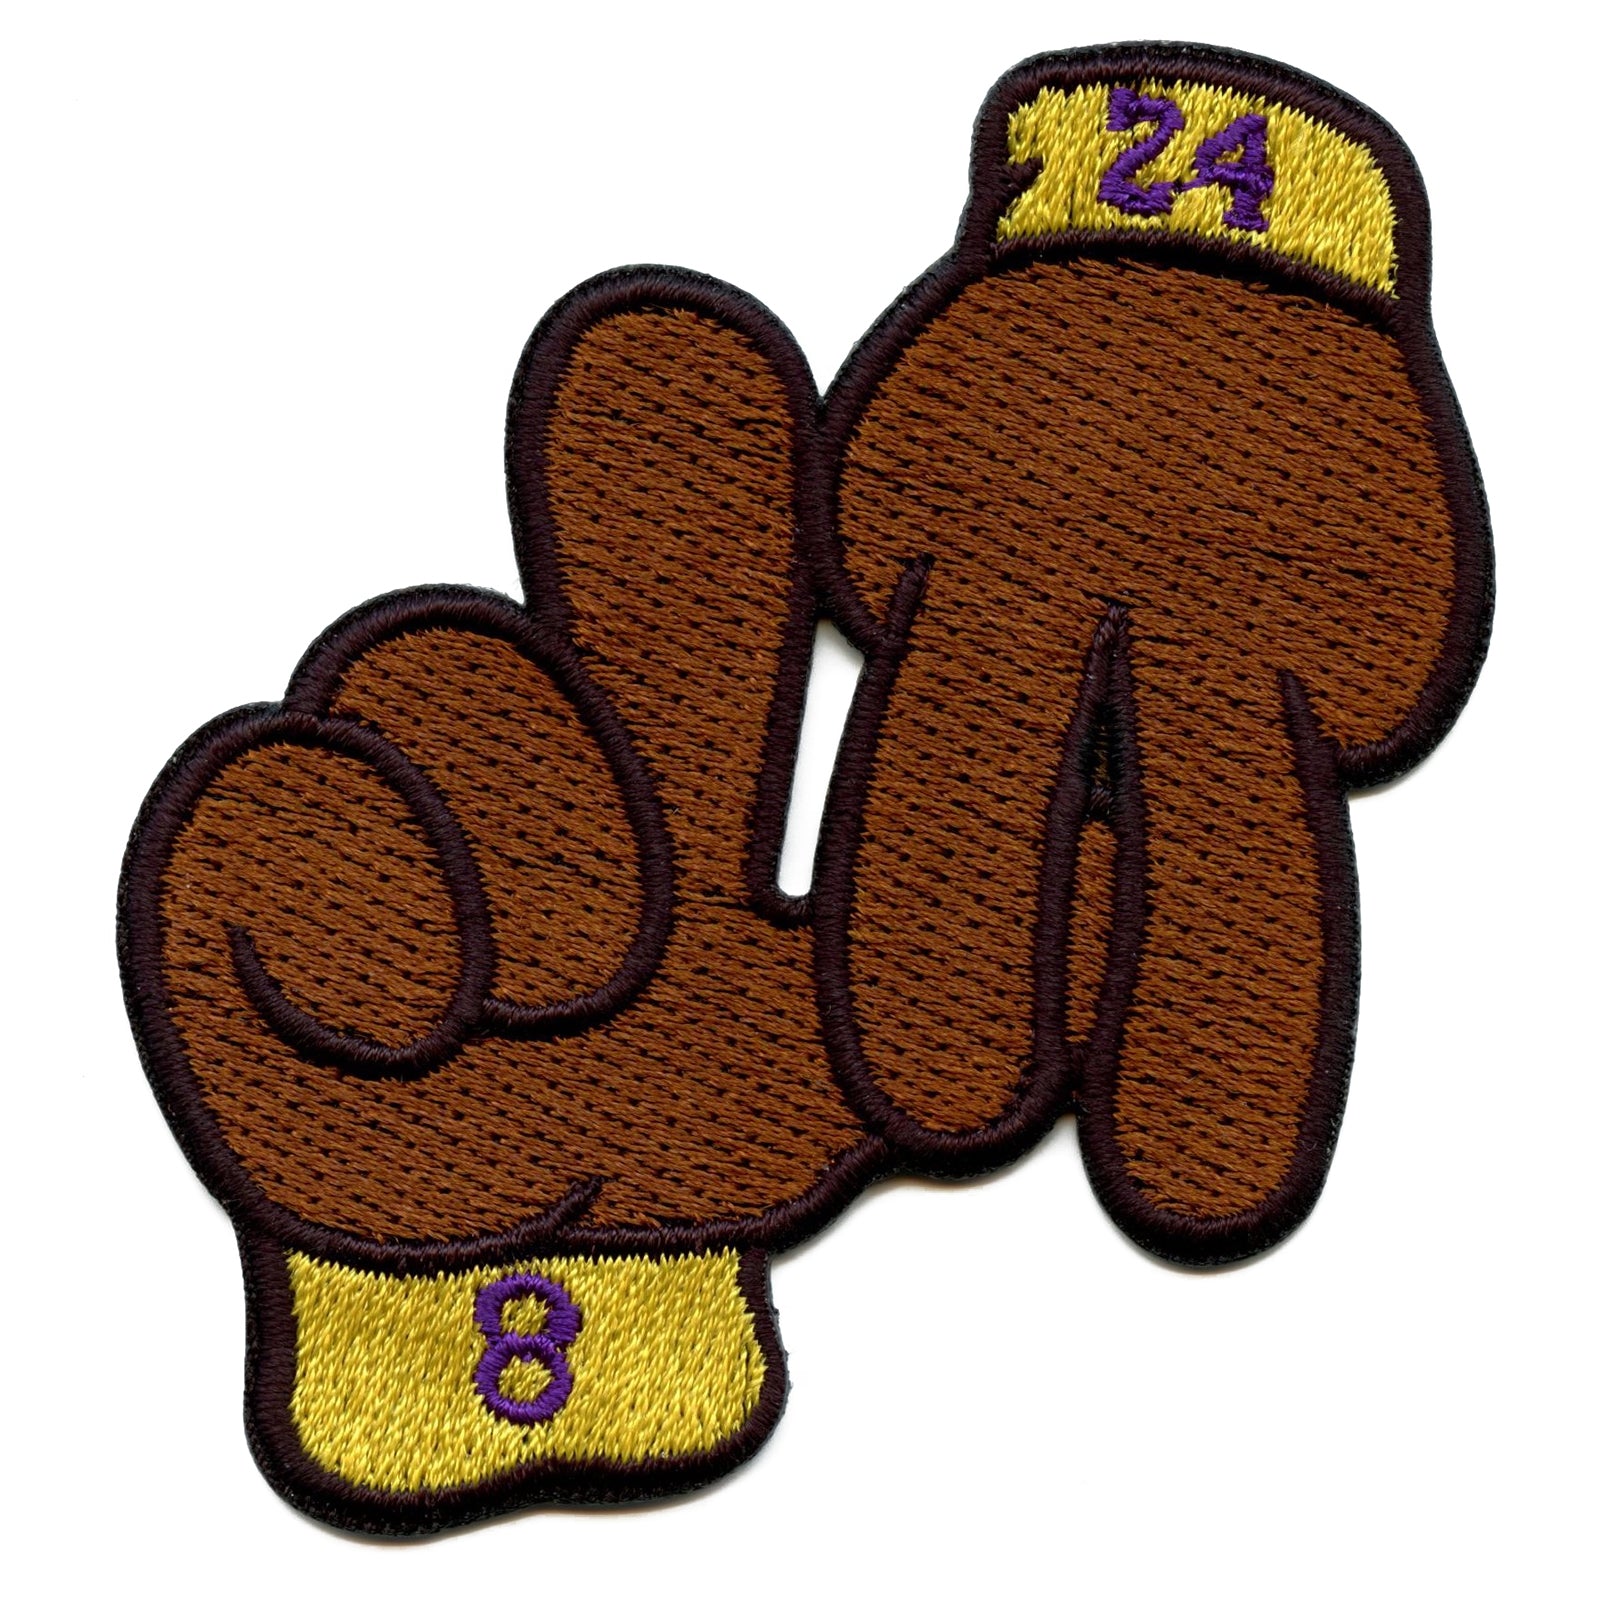 Los Angeles L.A. Fingers Sign Hands 8 & 24 Yellow Wrist Bands Basketball Iron On Patch 